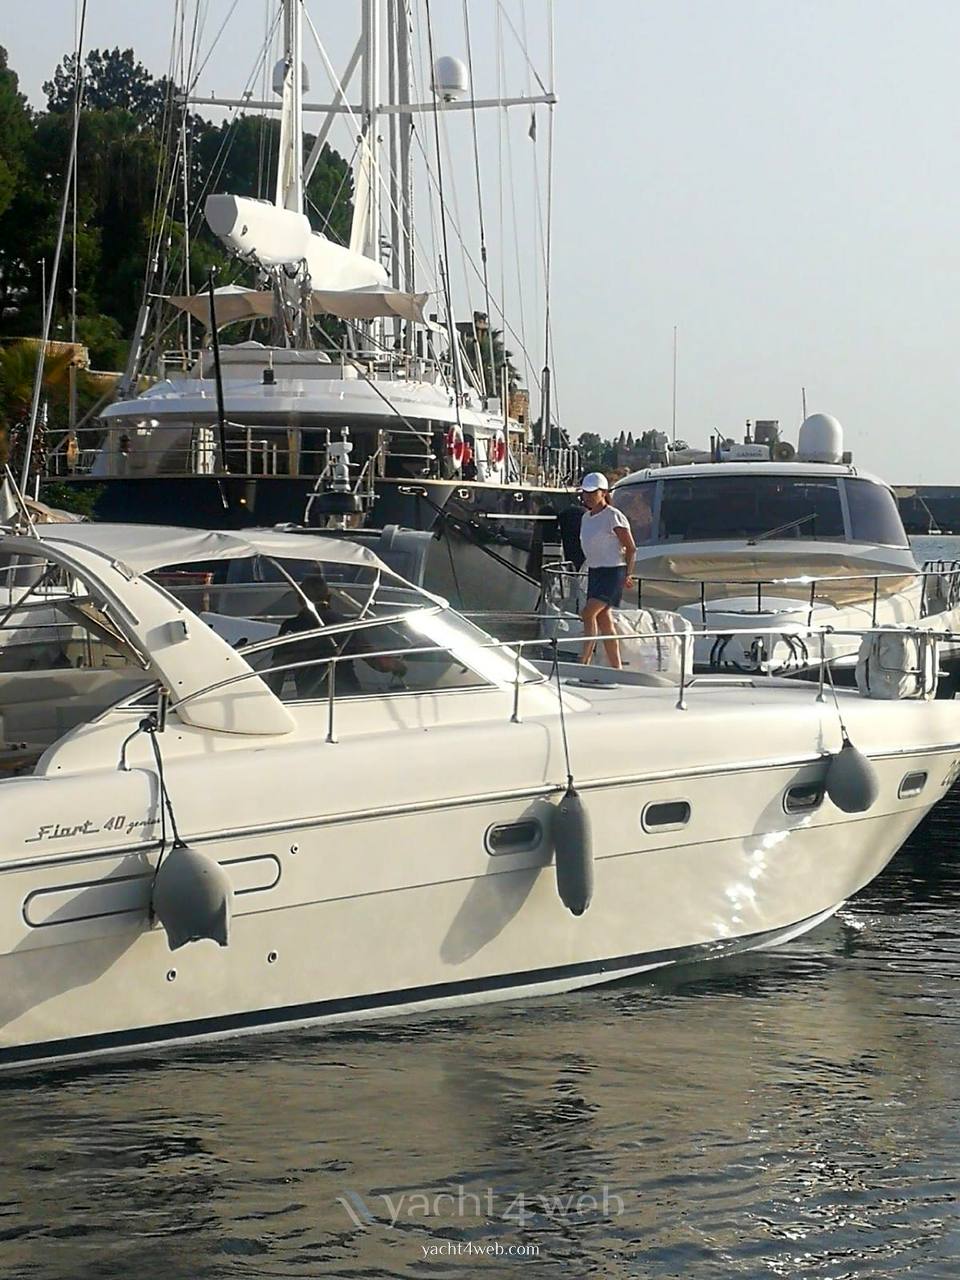 FIART 40 genius Motor boat used for sale